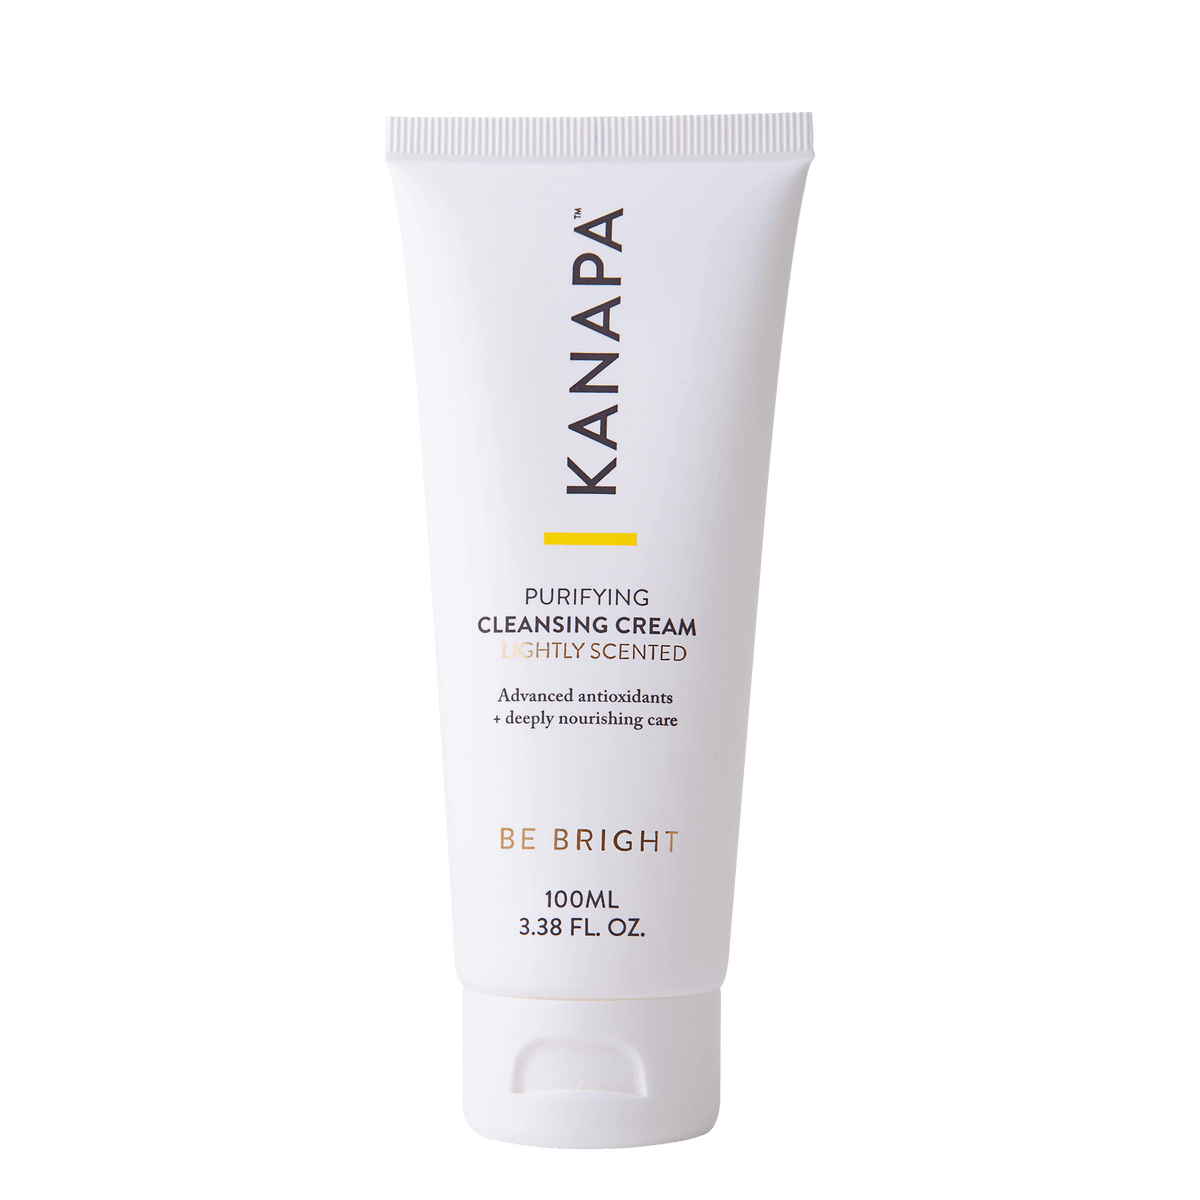 Purifying Cleansing Cream